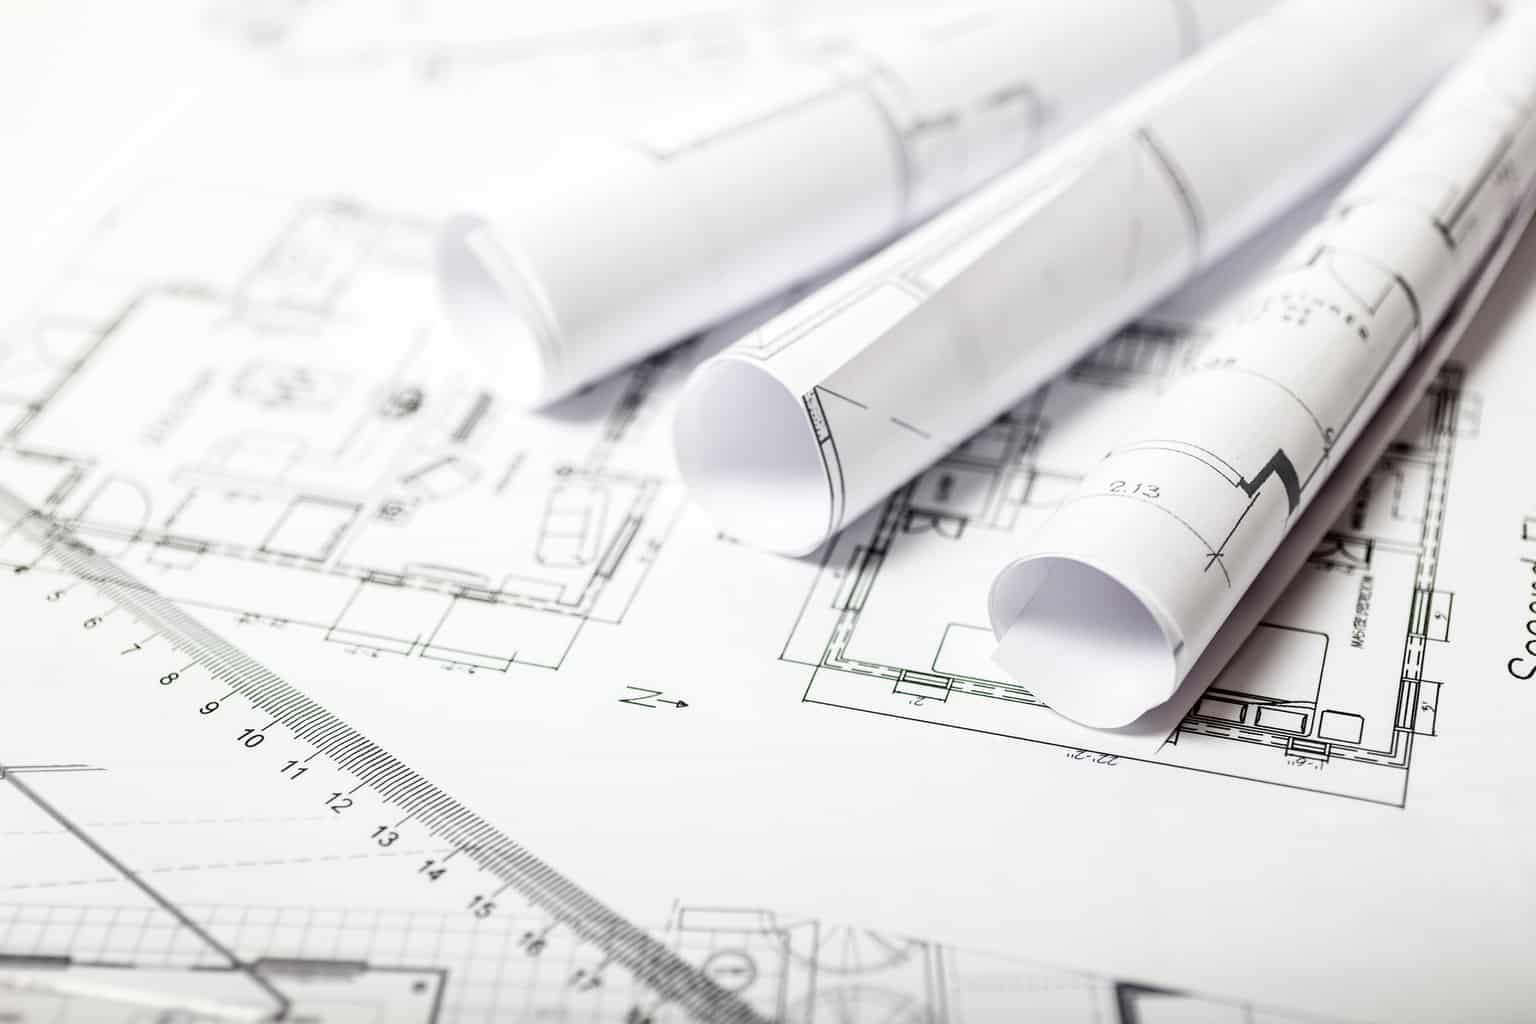 How To Draw Plans for a Building Permit (DIY Guide)